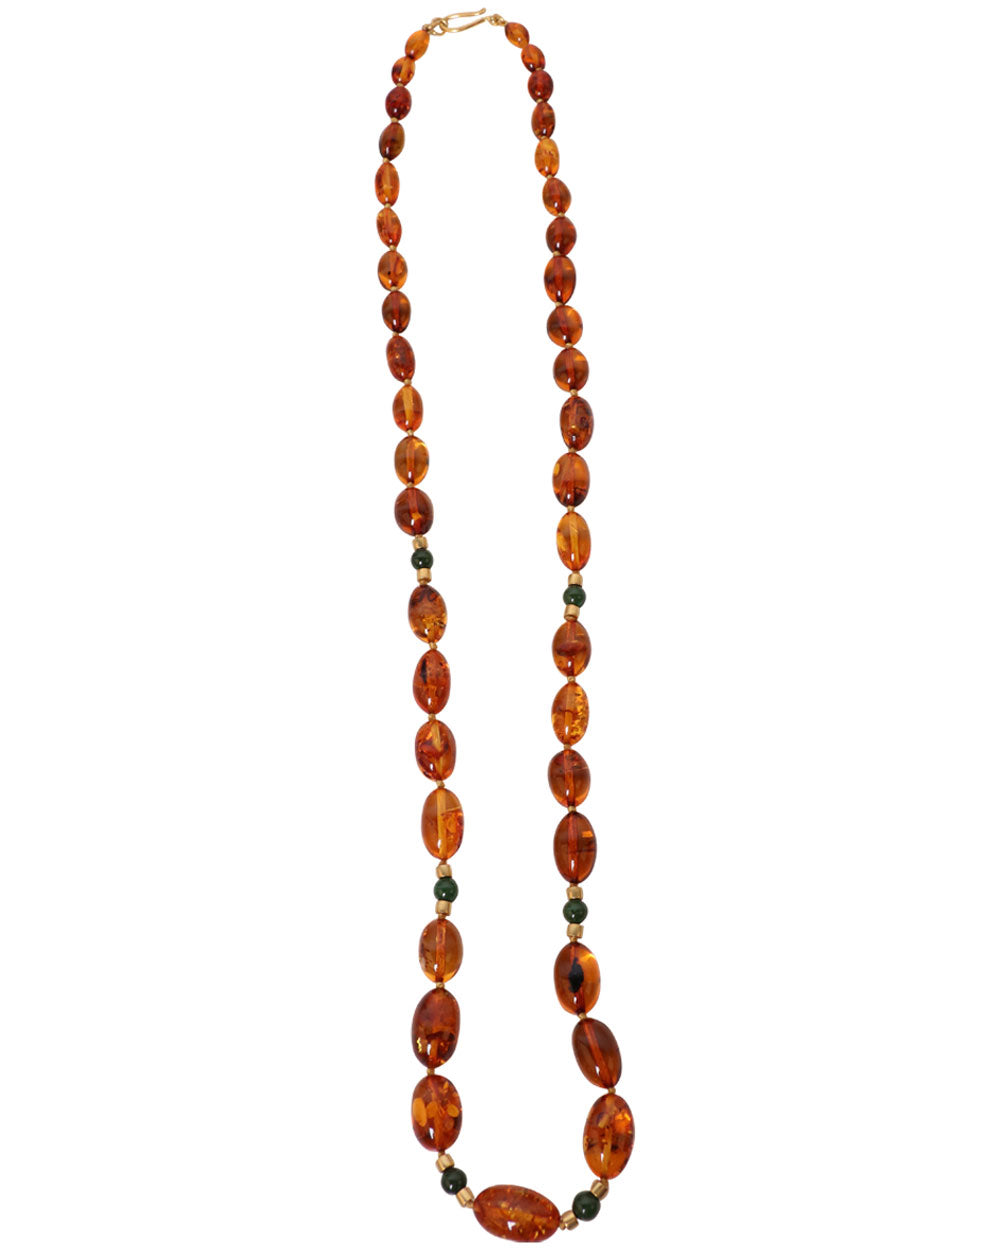 Honey Amber and Jade Indian Beaded Necklace